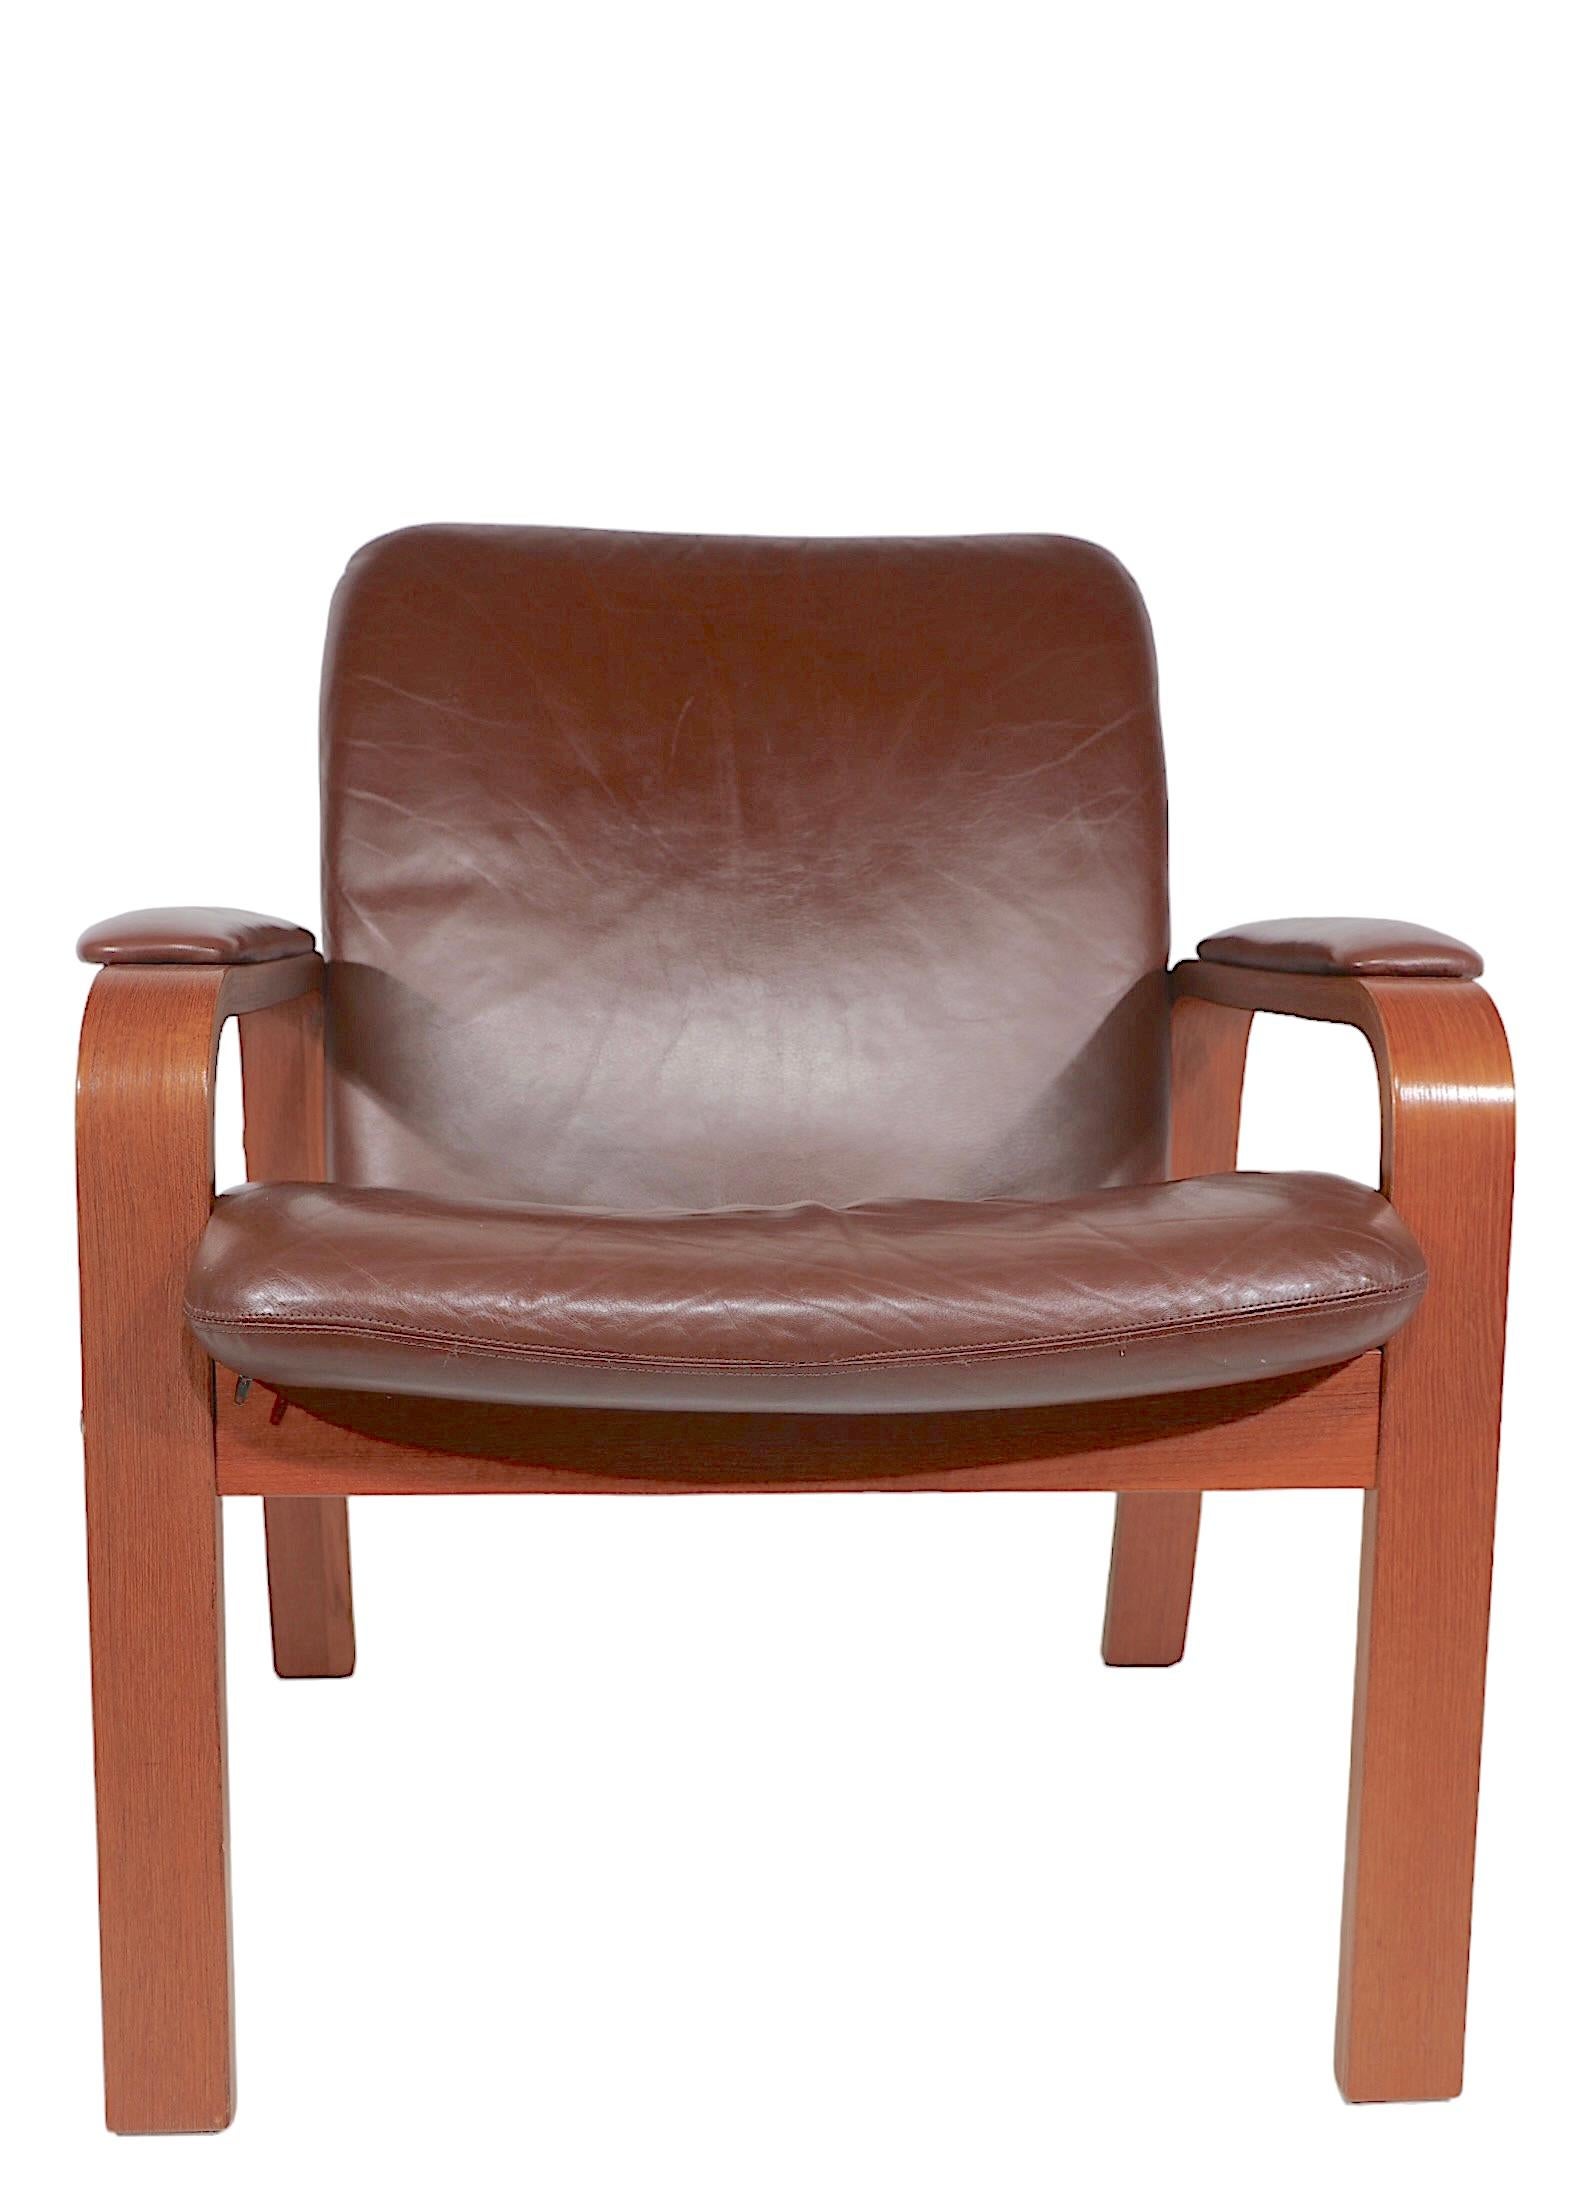 Pr. Scandinavian Mid Century Modern Lounge Arm Chairs Made in Norway by Ekorness For Sale 12